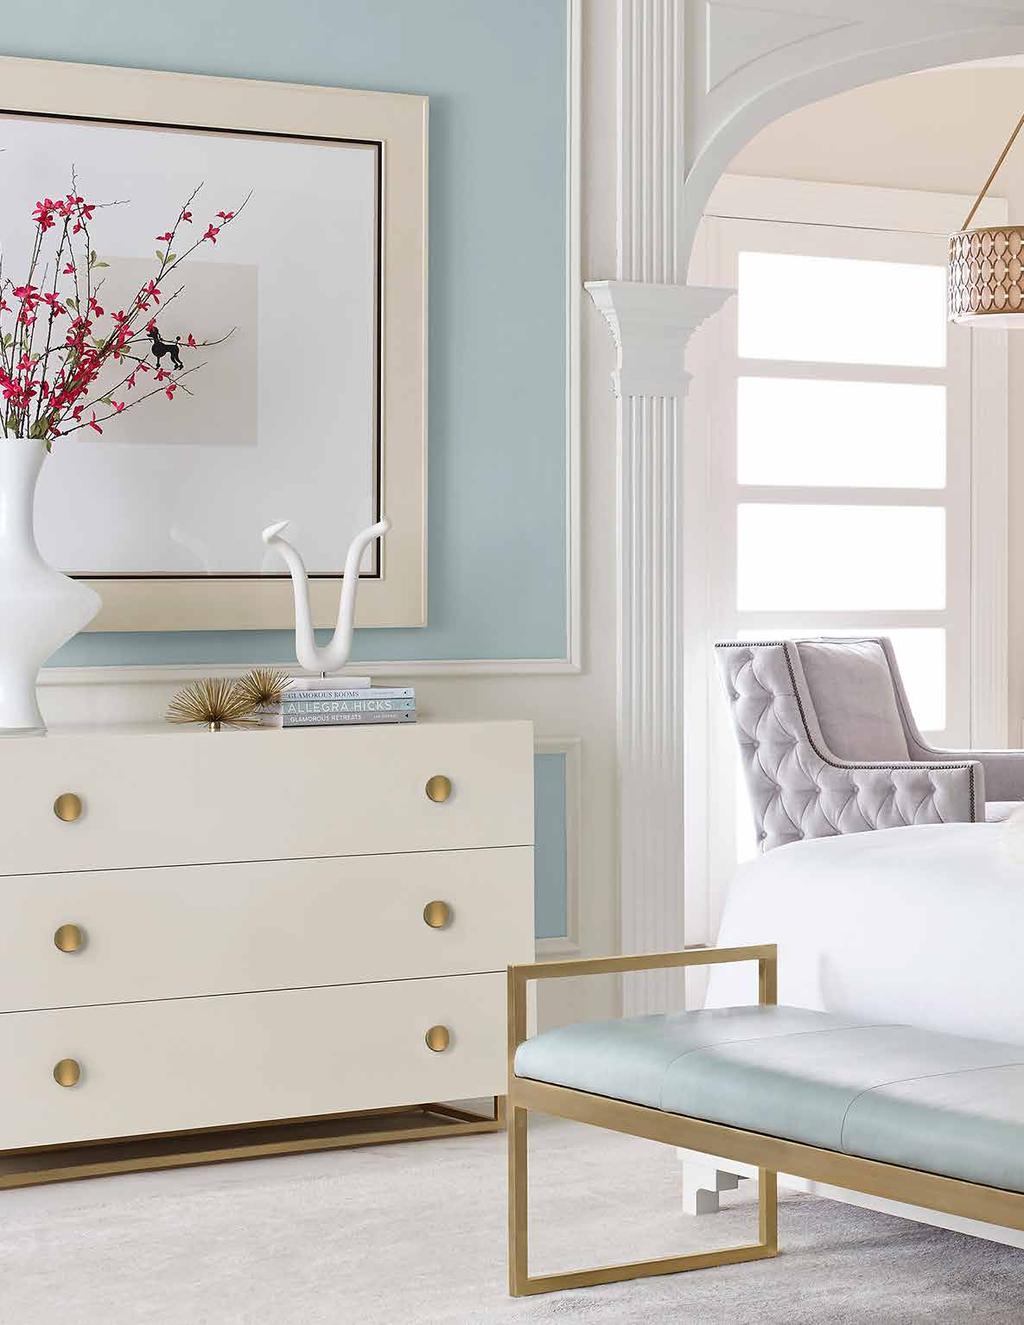 Left to Right: K131D Nouveaux Drawer Chest (Kataryna). Finish: MIY Paint, Pristine Gloss in Benjamin Moore Mannequin Cream OC-92.